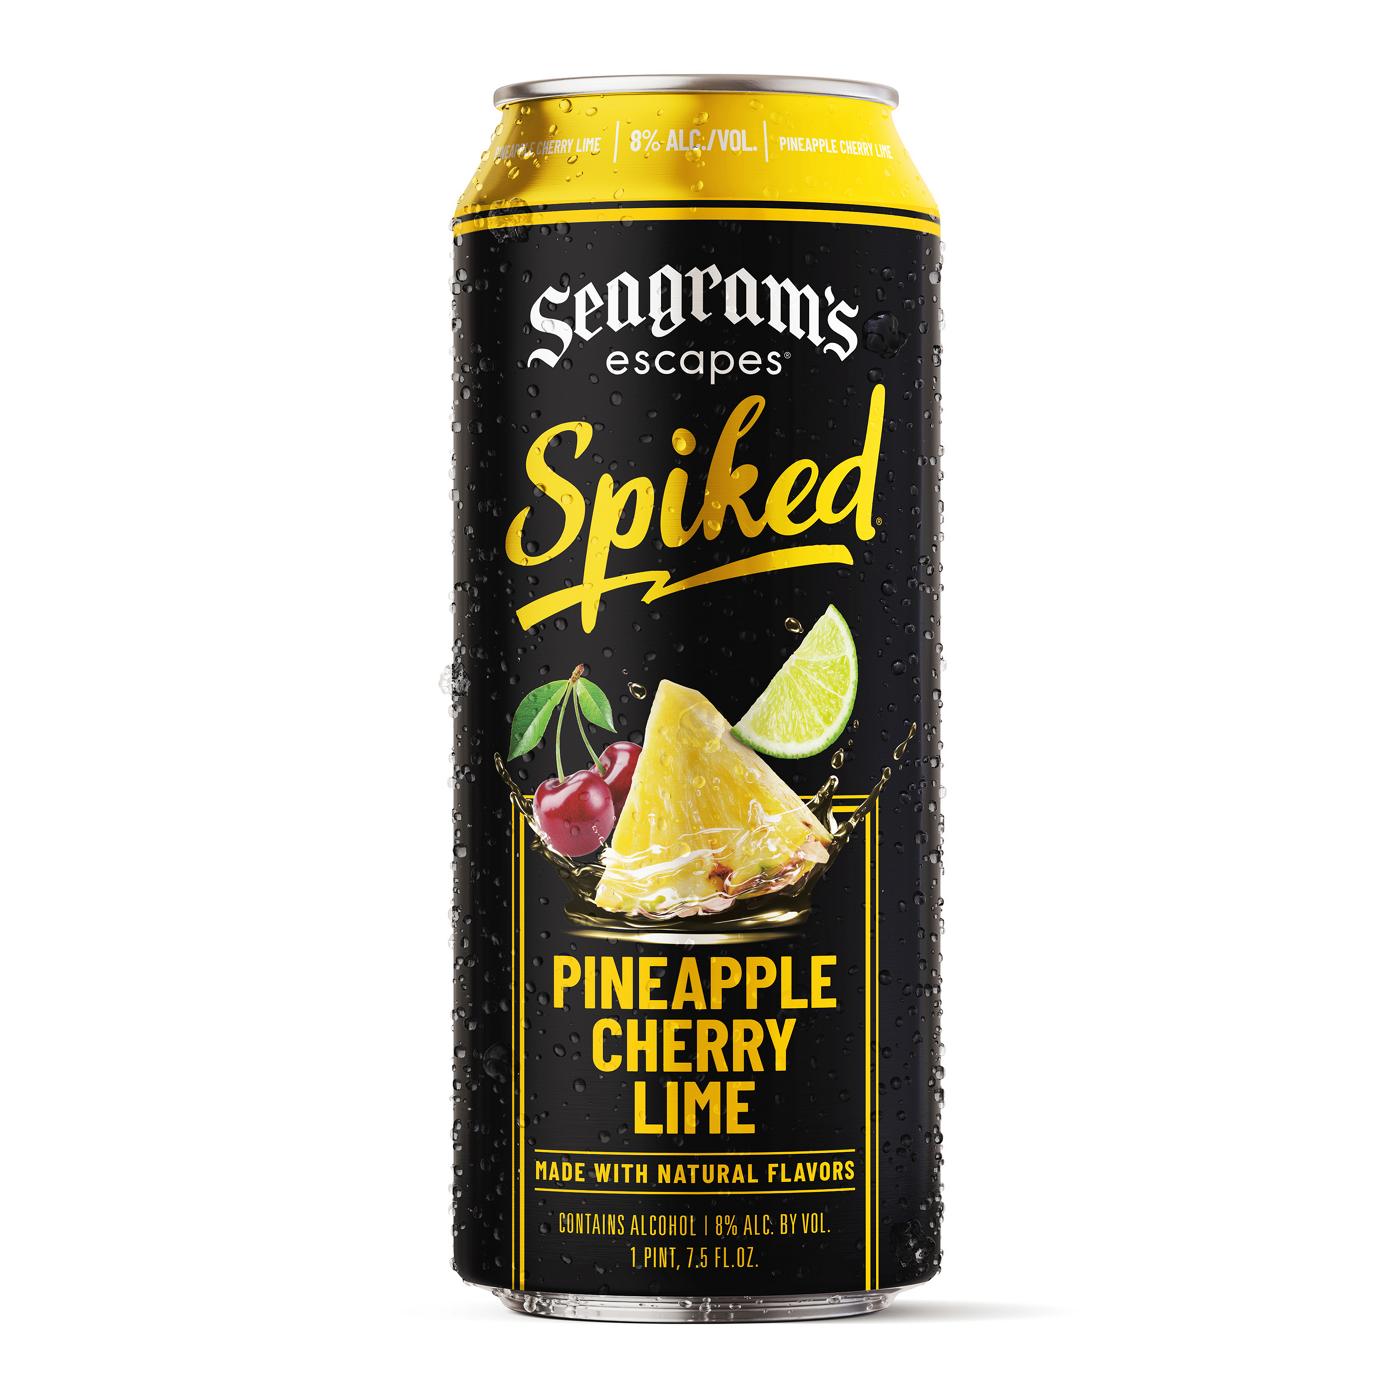 Seagram's Escapes Spiked Pineapple Cherry Lime; image 1 of 2